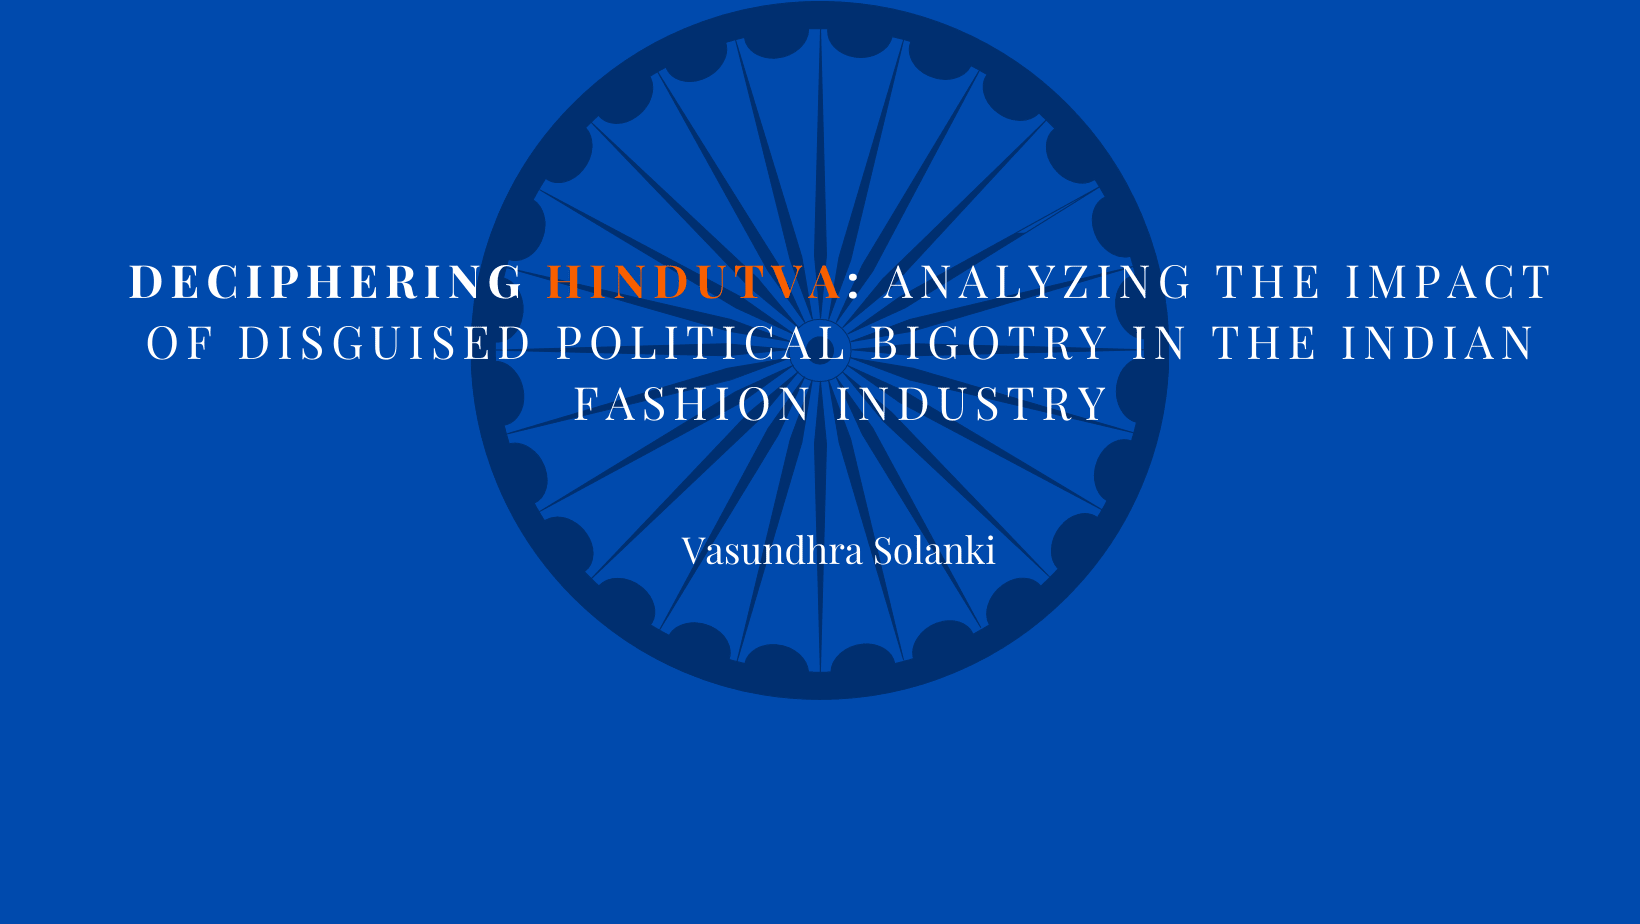 DECIPHERING HINDUTVA IN THE INDIAN FASHION SYSTEM